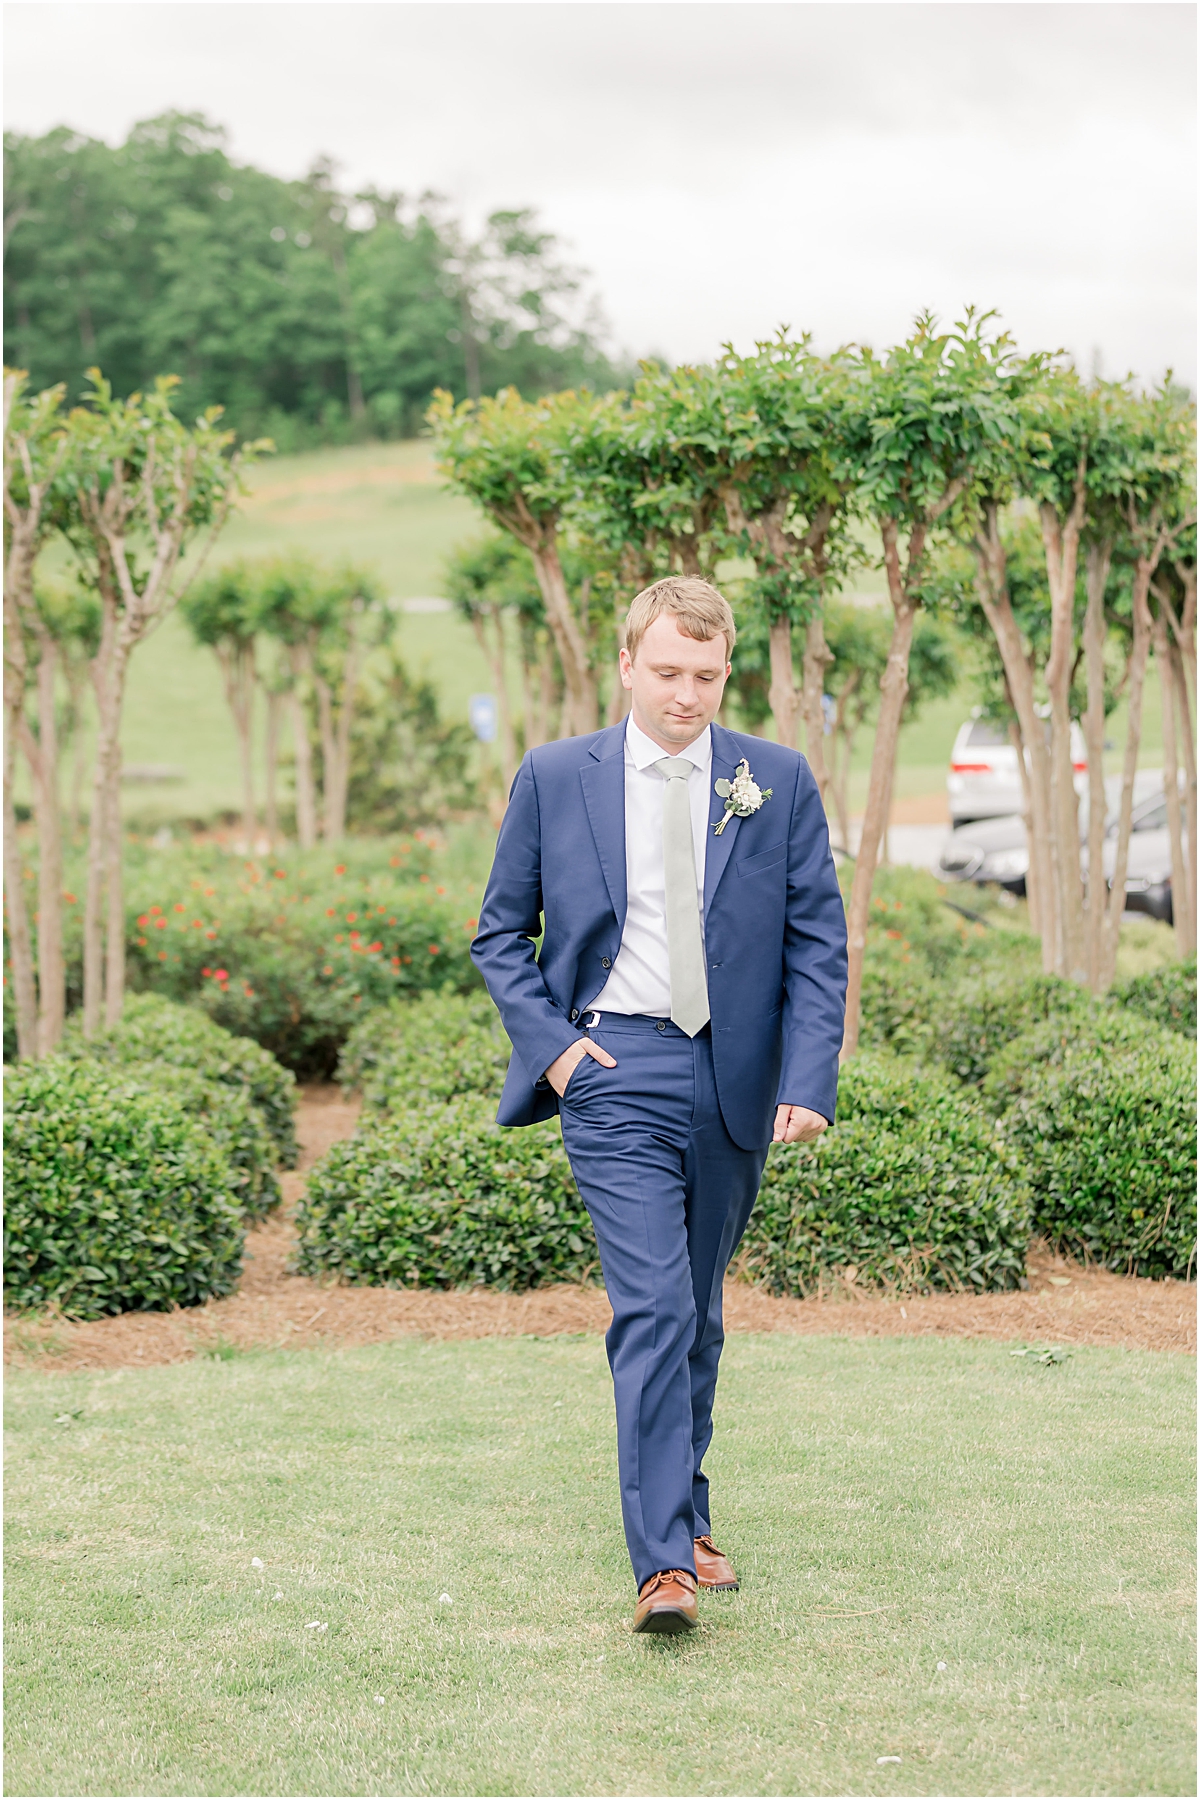 Davis walking in the vineyard with his hand in his pocket at Cleveland GA Wedding Venues